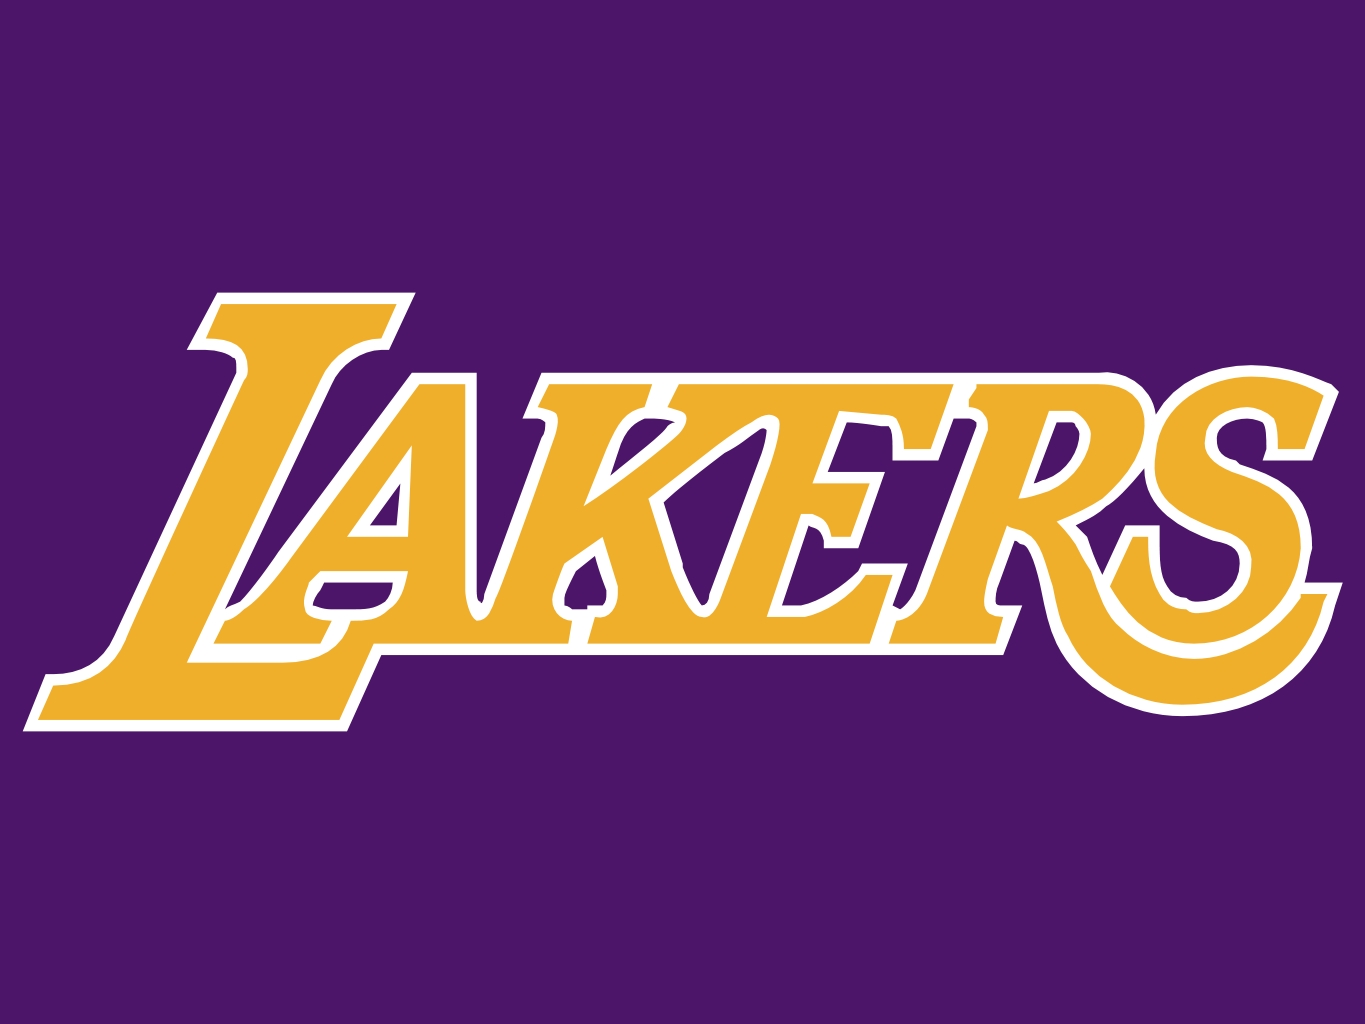 sports, los angeles lakers, basketball